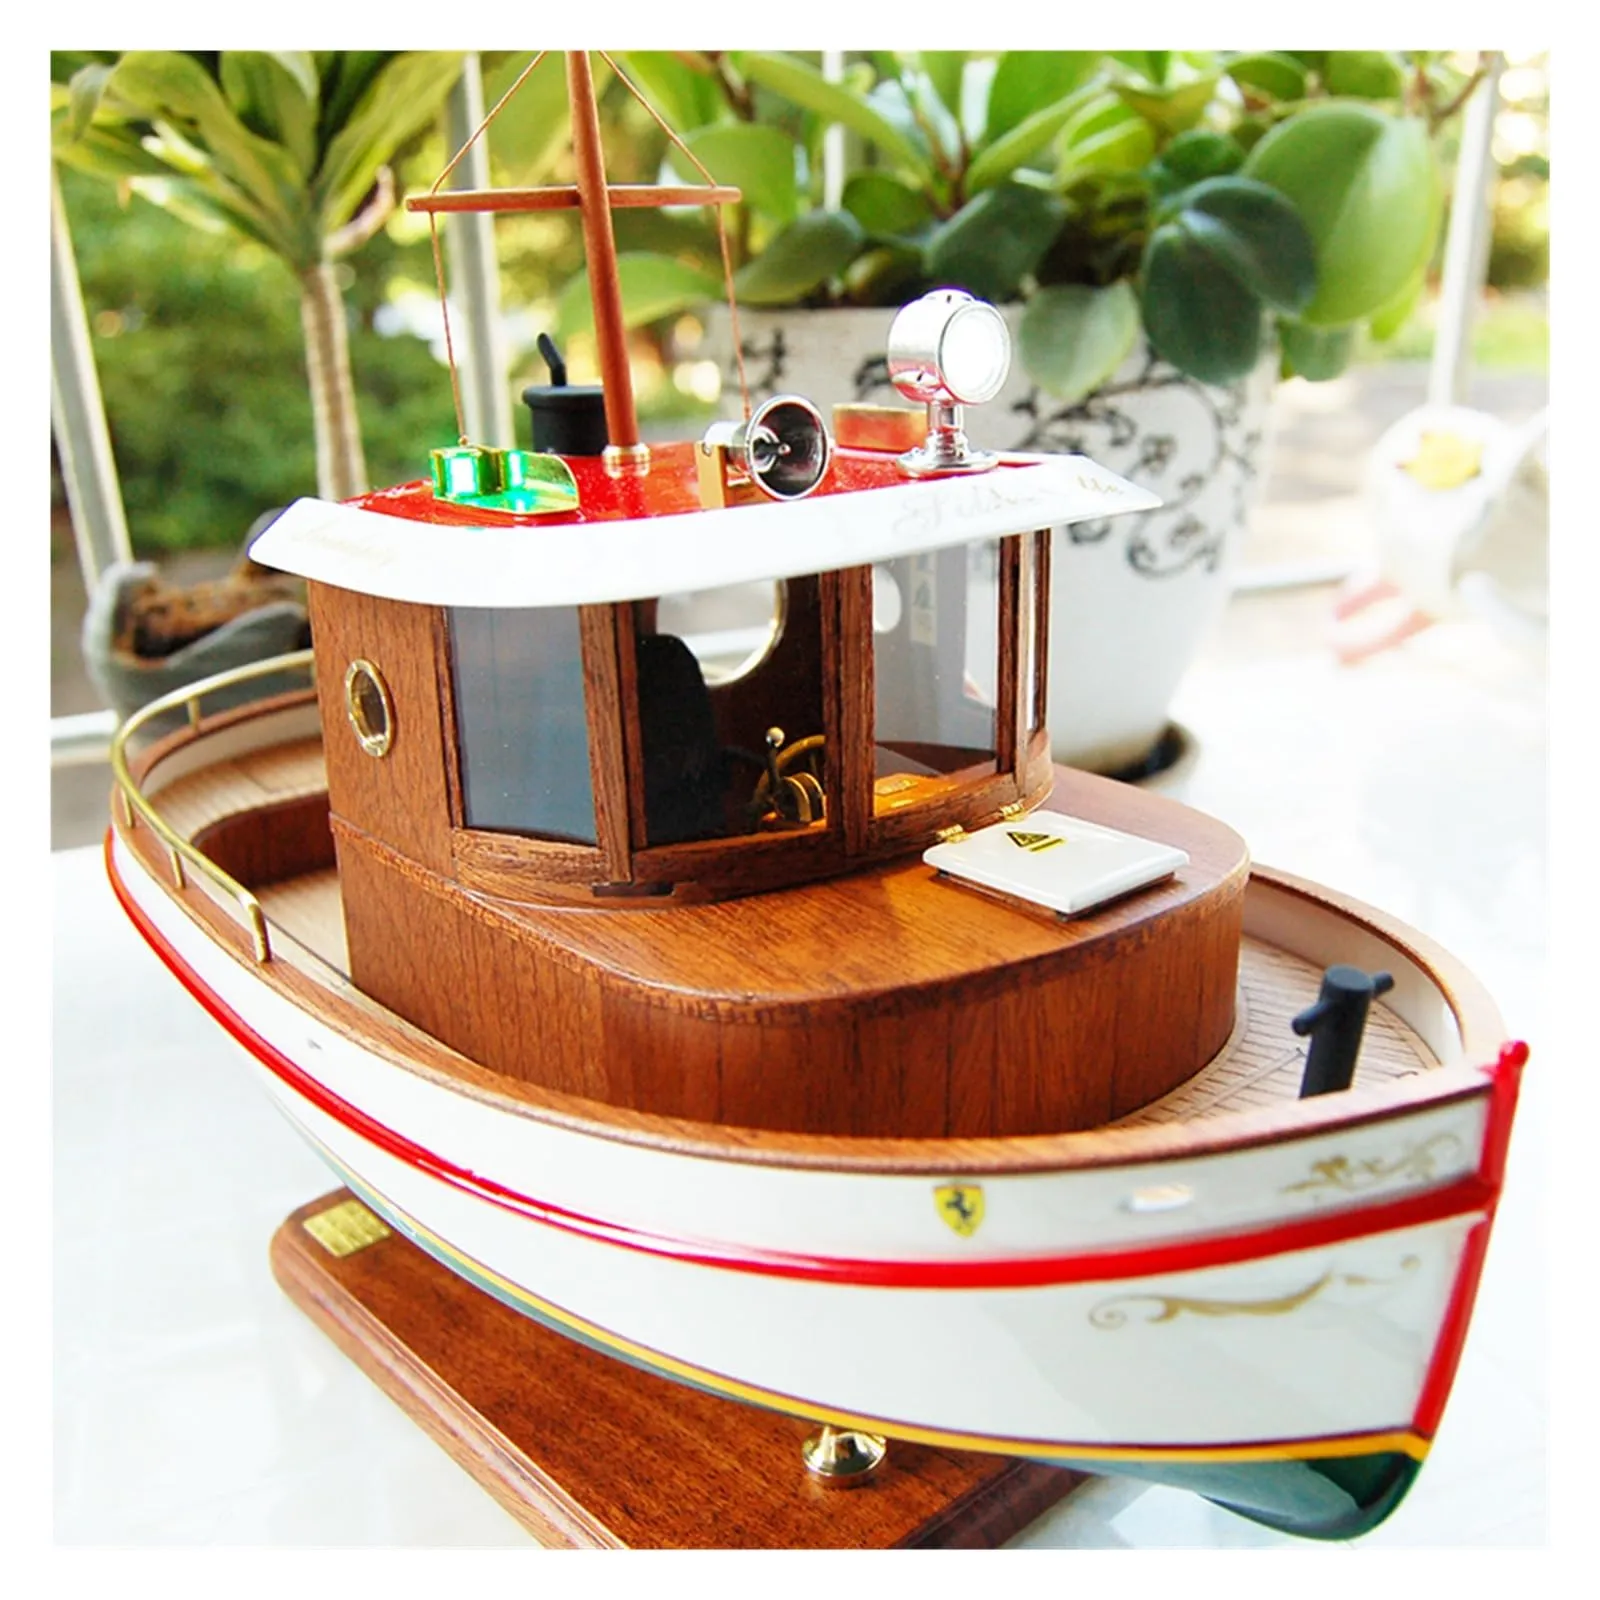 DIY Wooden Yacht Model Fire Starter Kit For Cute Home Decoration From  Jamilasouth, $301.41